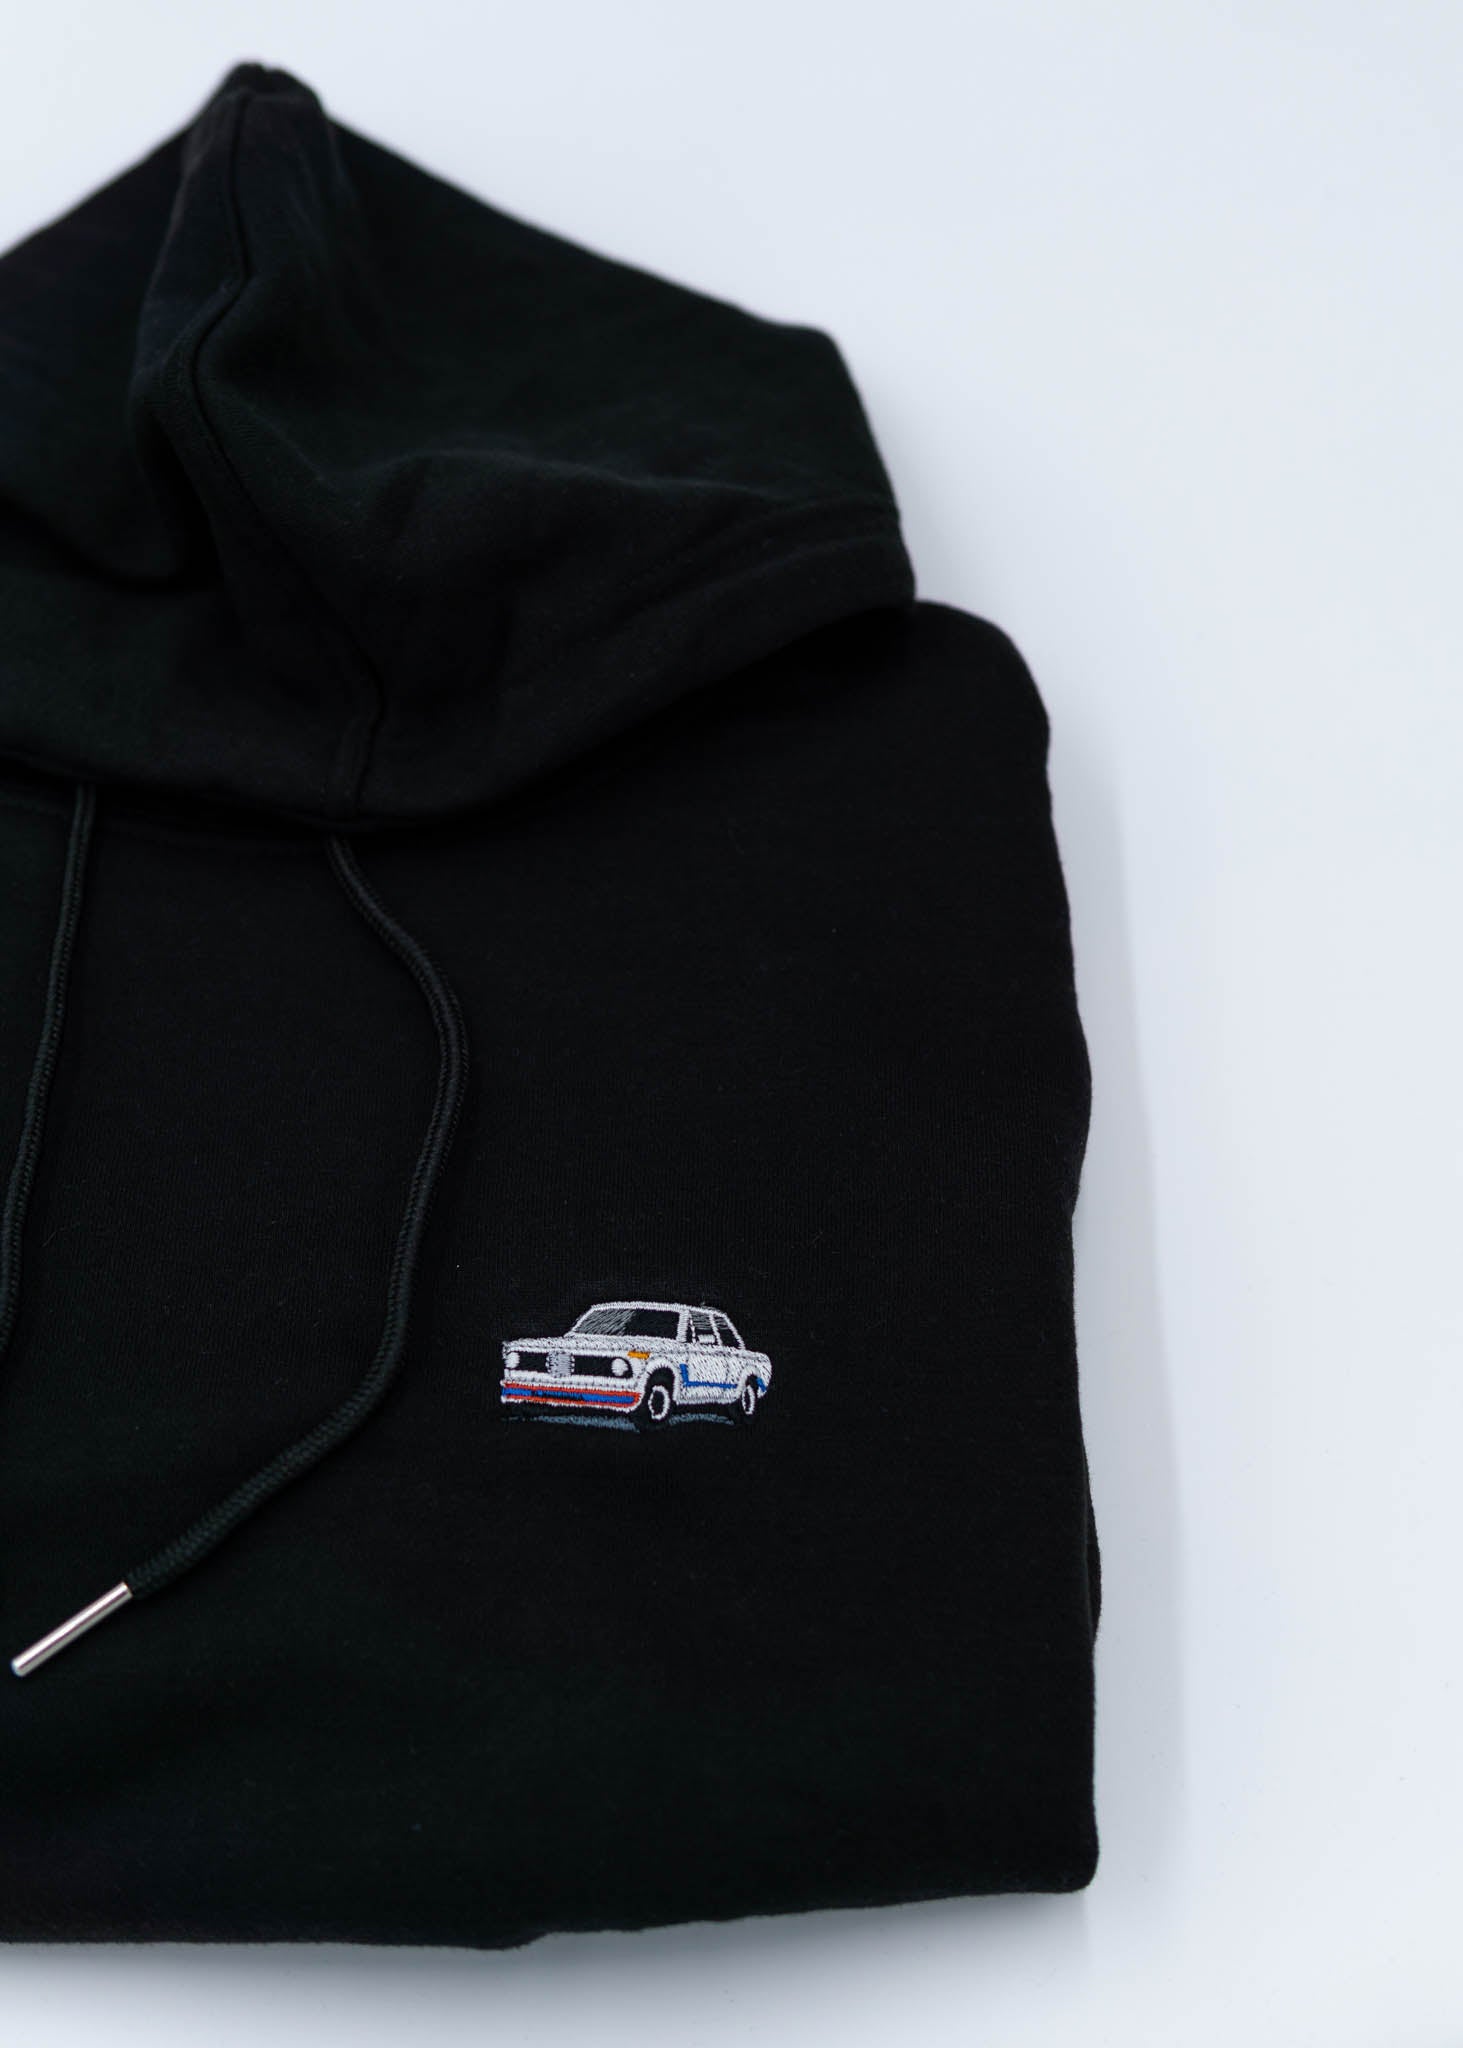 A black BMW cropped hoodie for women. Photo is a close up view of the cropped sweater with an embroidered BMW 2002 Turbo. Fabric composition is 100% cotton. The material is soft, comfortable, breathable, and non-transparent. The style of this crop hoodie is long sleeve, crewneck with a hood, hooded, with embroidery on the chest.